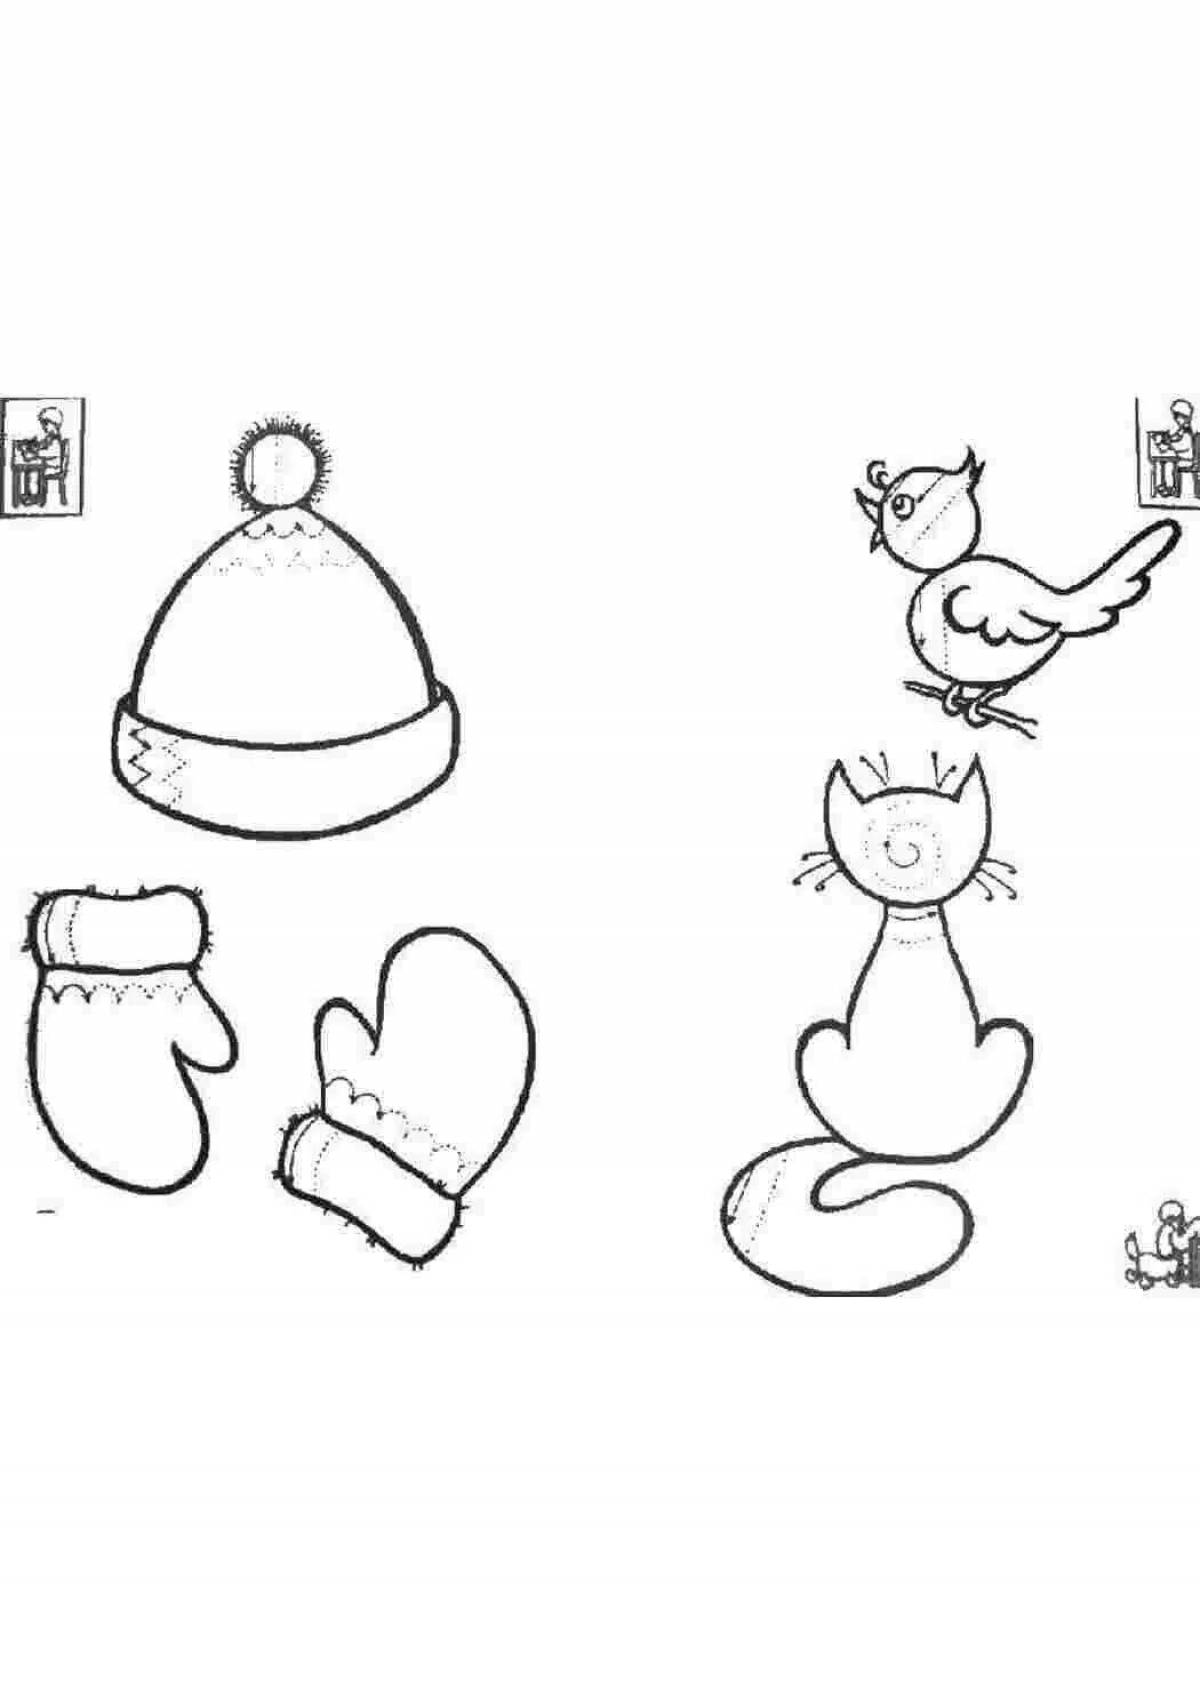 Adorable mittens and hat coloring book for kids